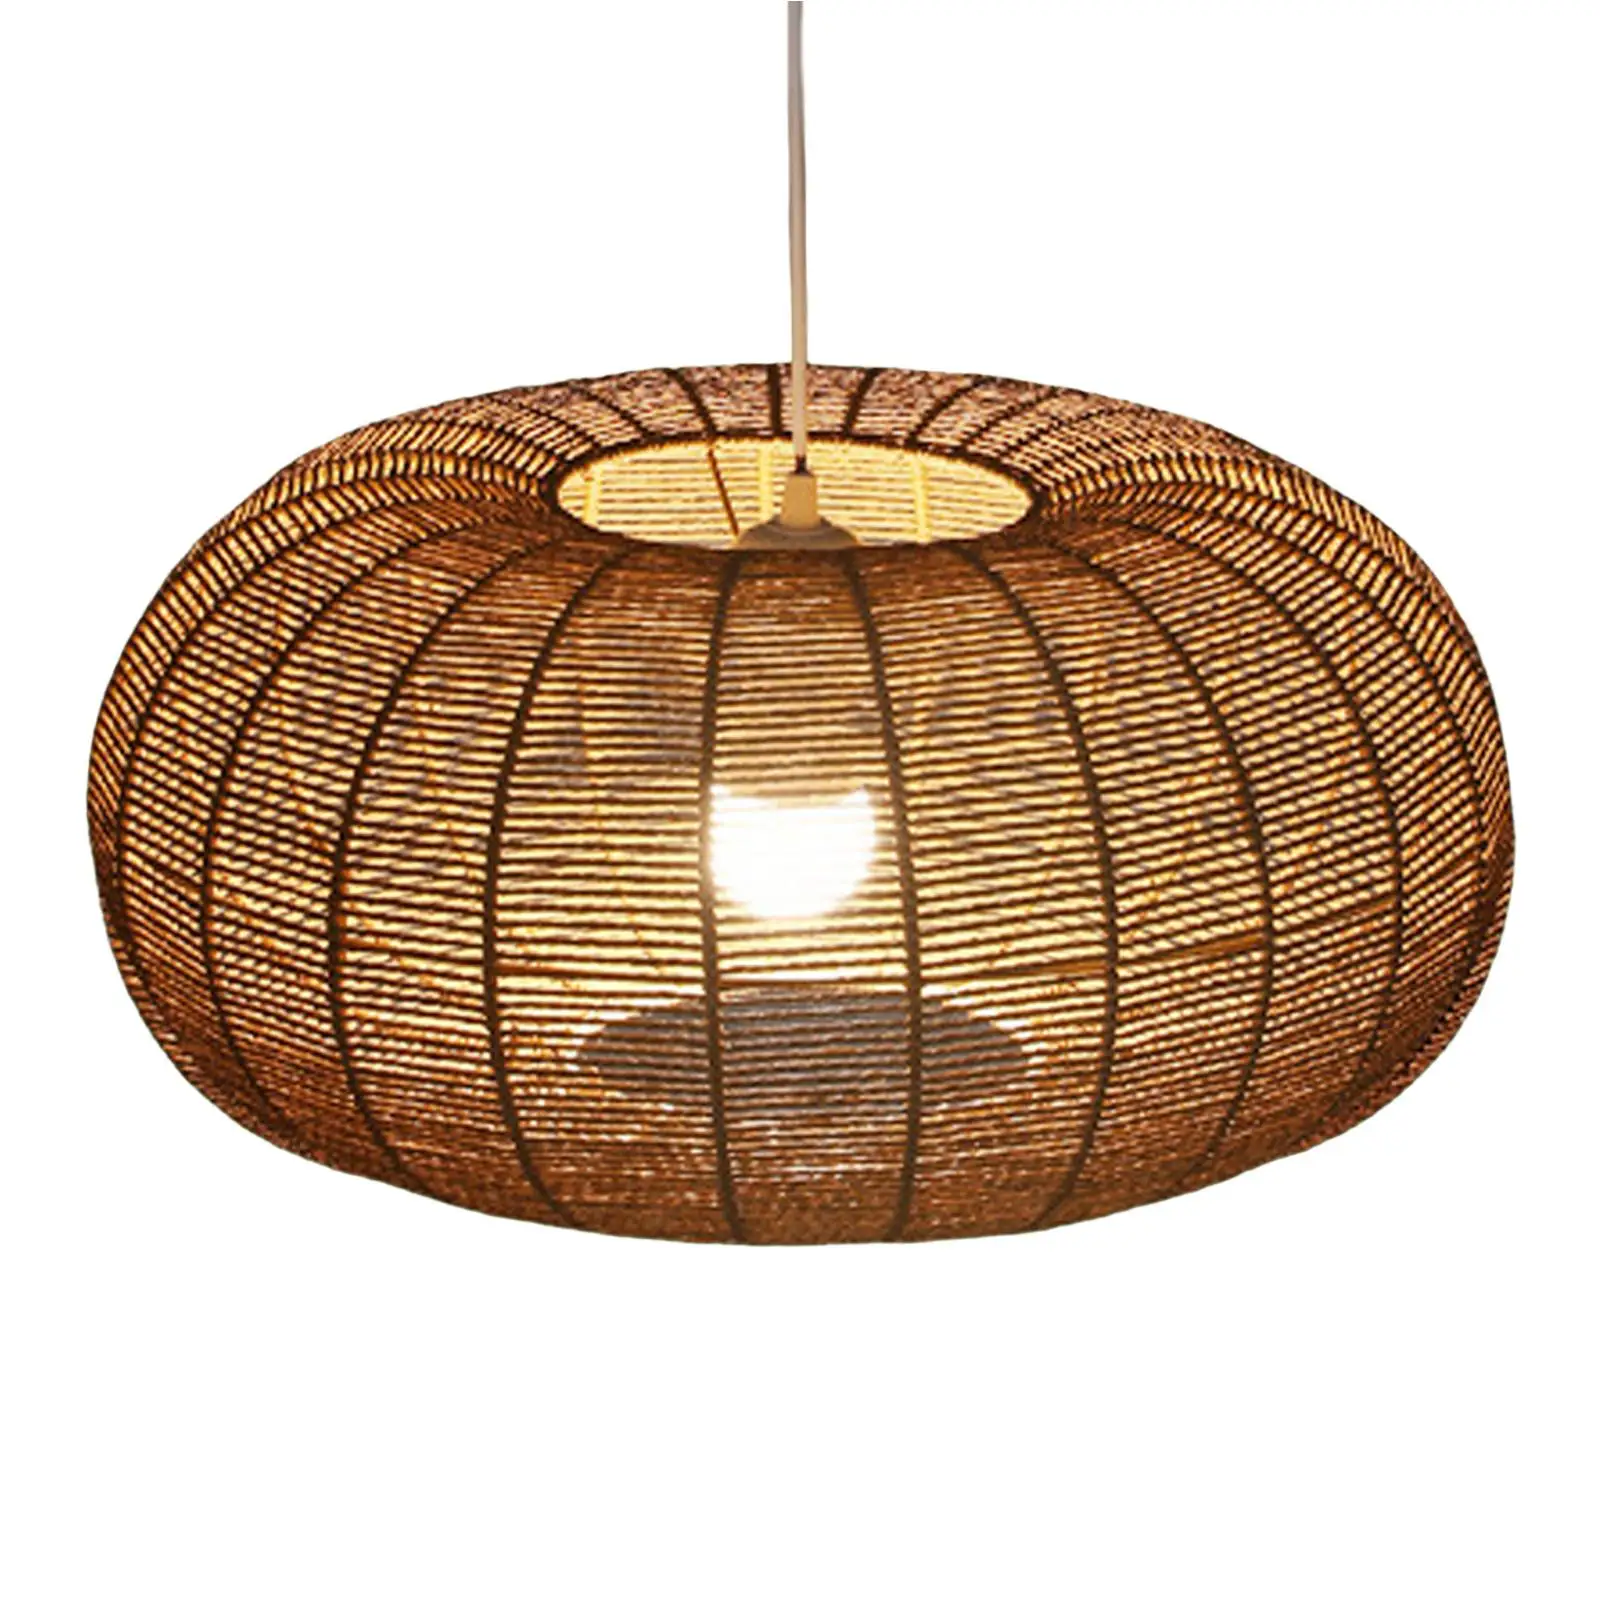 Pendant Lamp Shade, Decor Lampshade for Hotel Bedroom Kitchen Dining Room